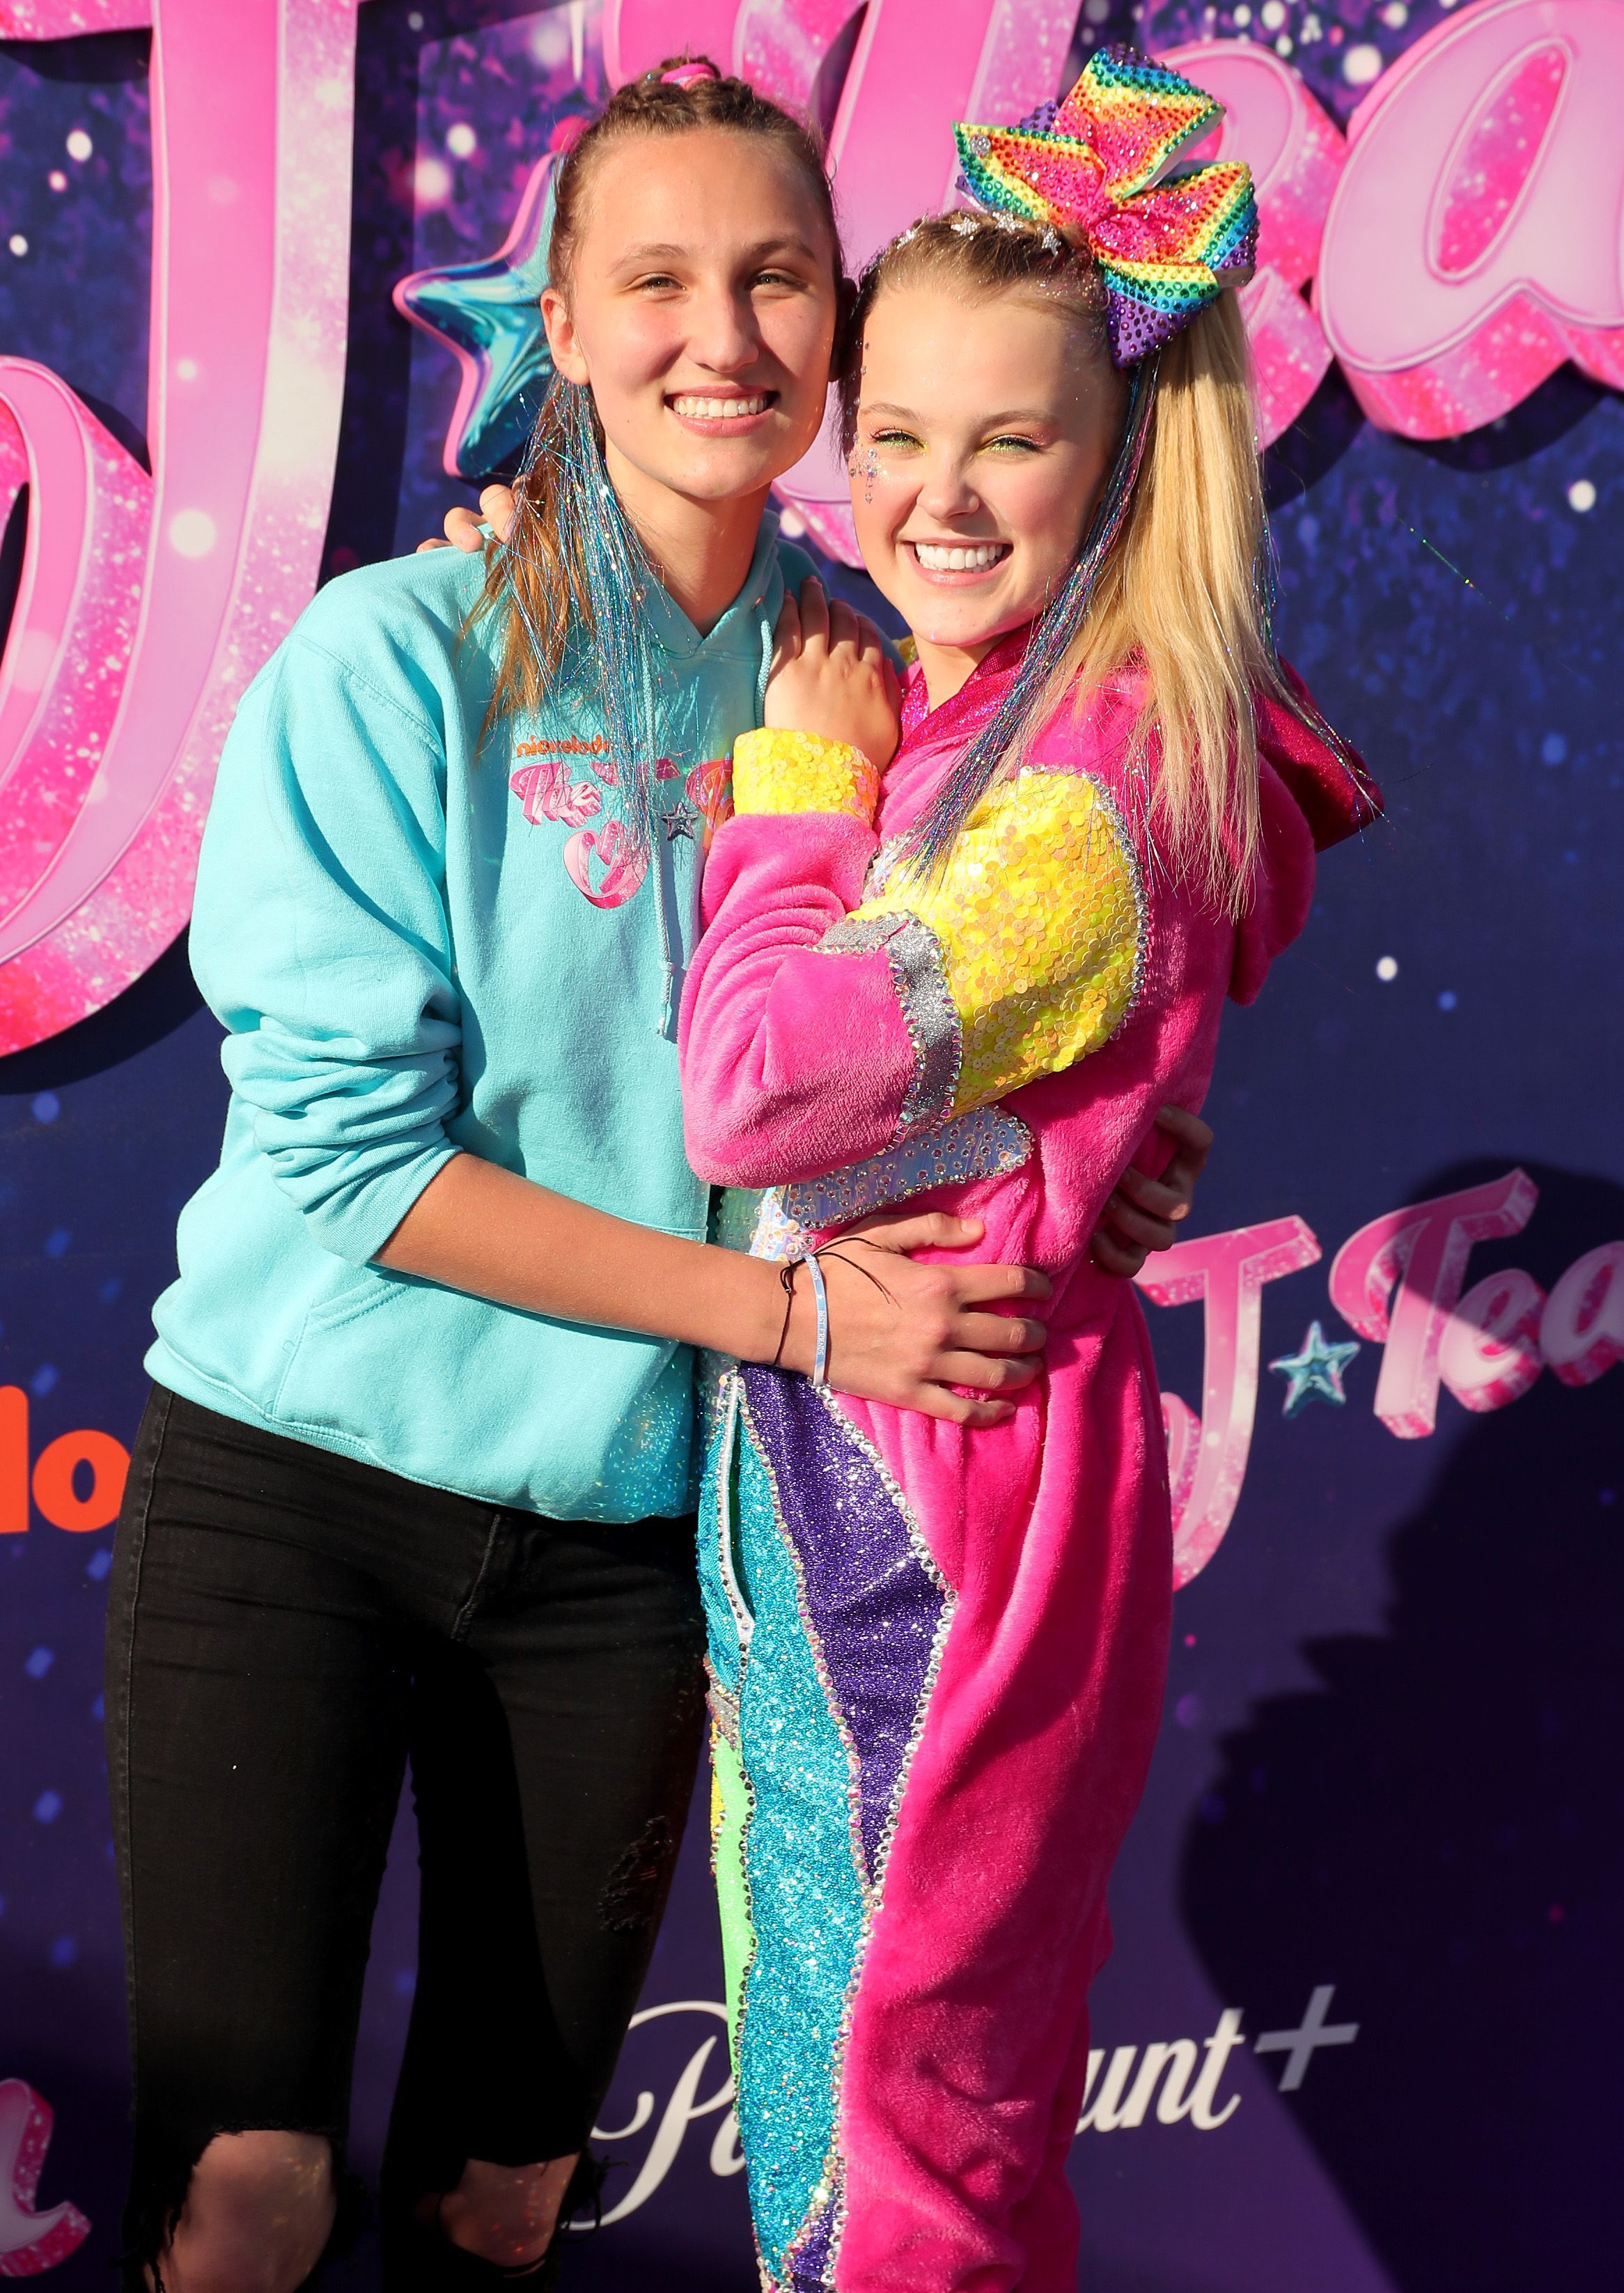 https://hips.hearstapps.com/hmg-prod/images/kylie-prew-and-jojo-siwa-attend-a-drive-in-screening-and-news-photo-1631033437.jpg